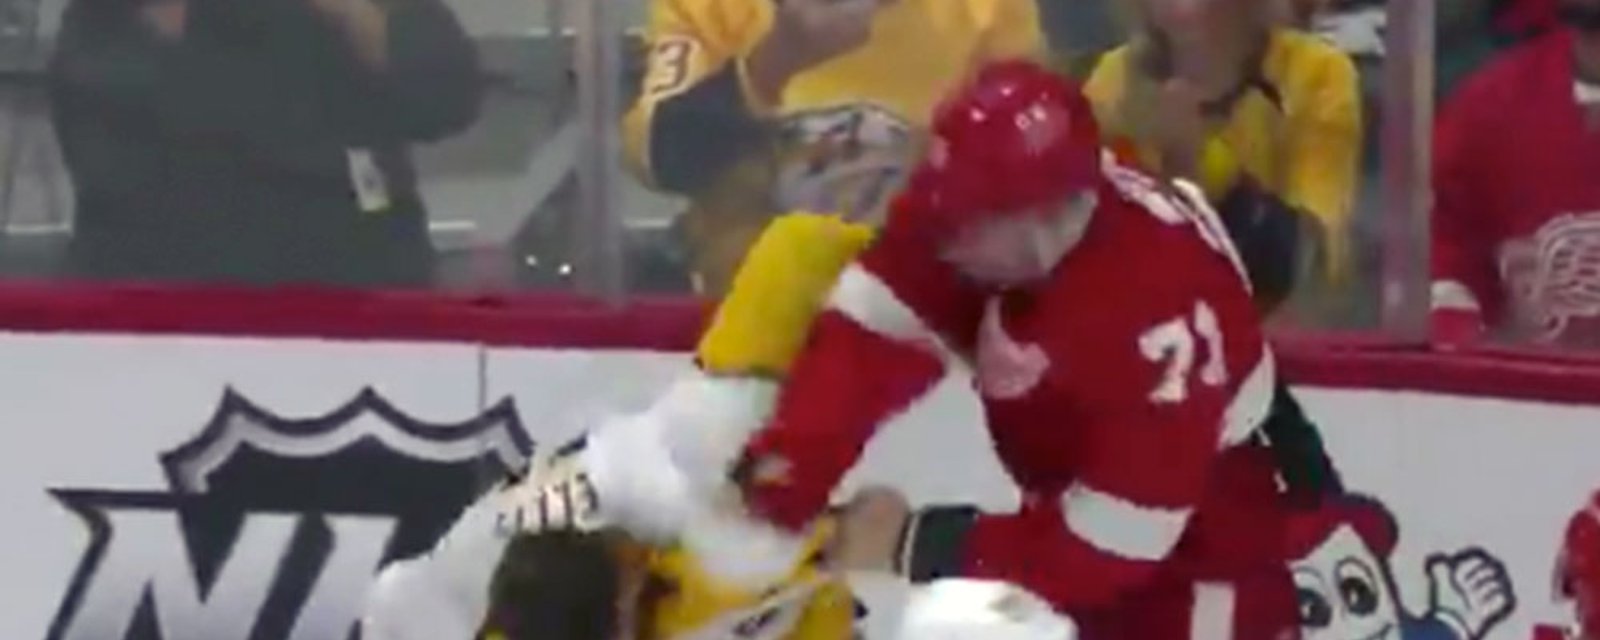 Larkin fights Ellis after taking a dirty hit to the head